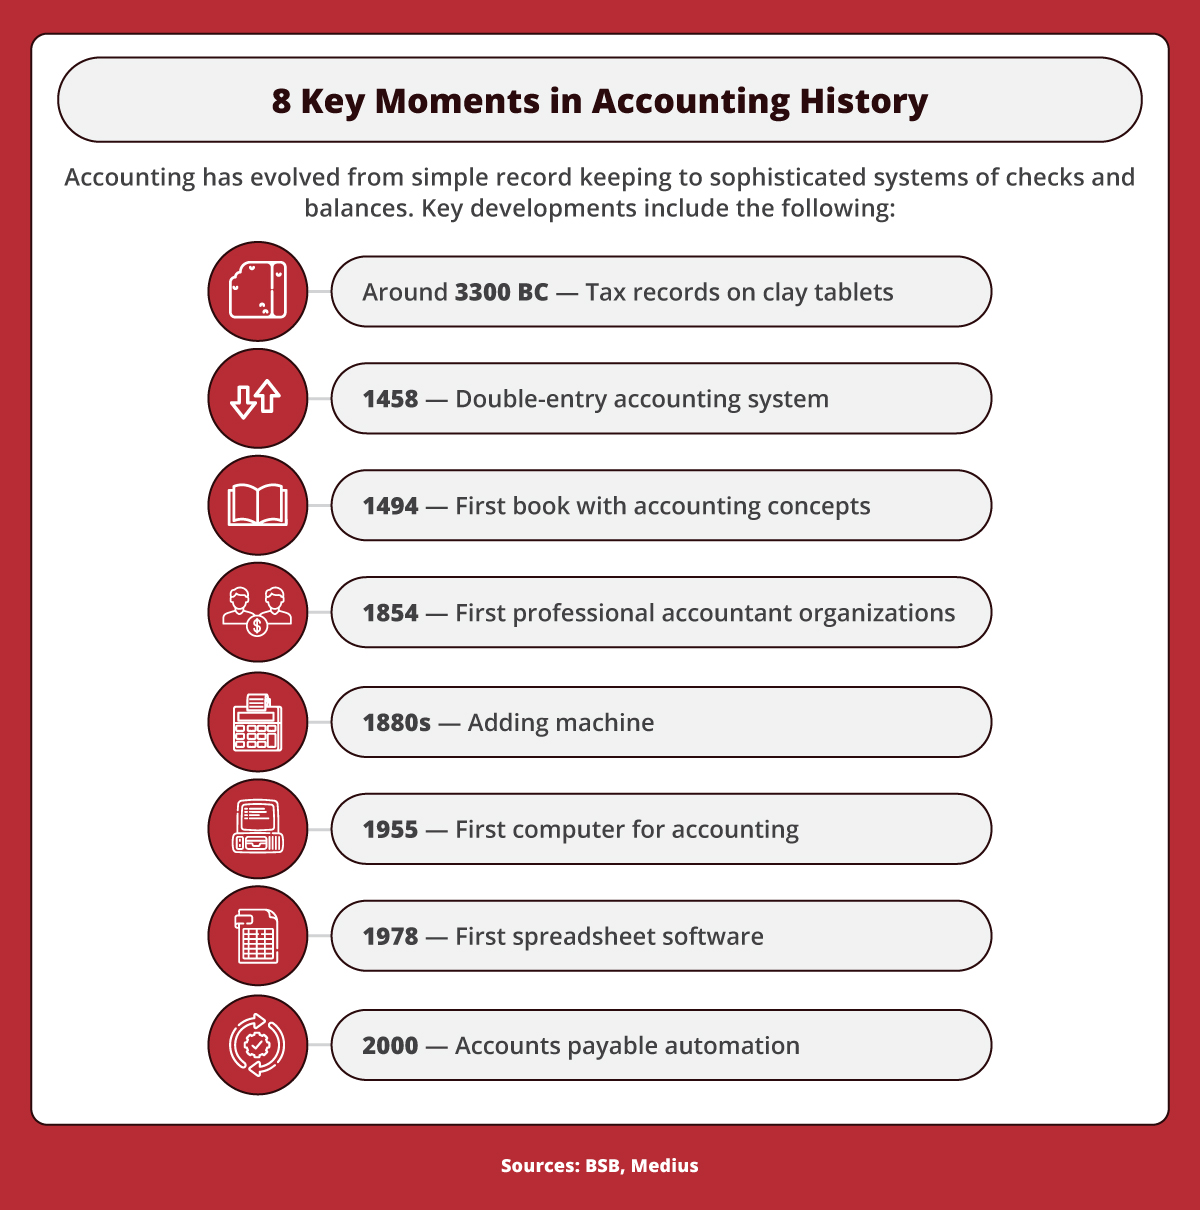 A brief history of accounting.